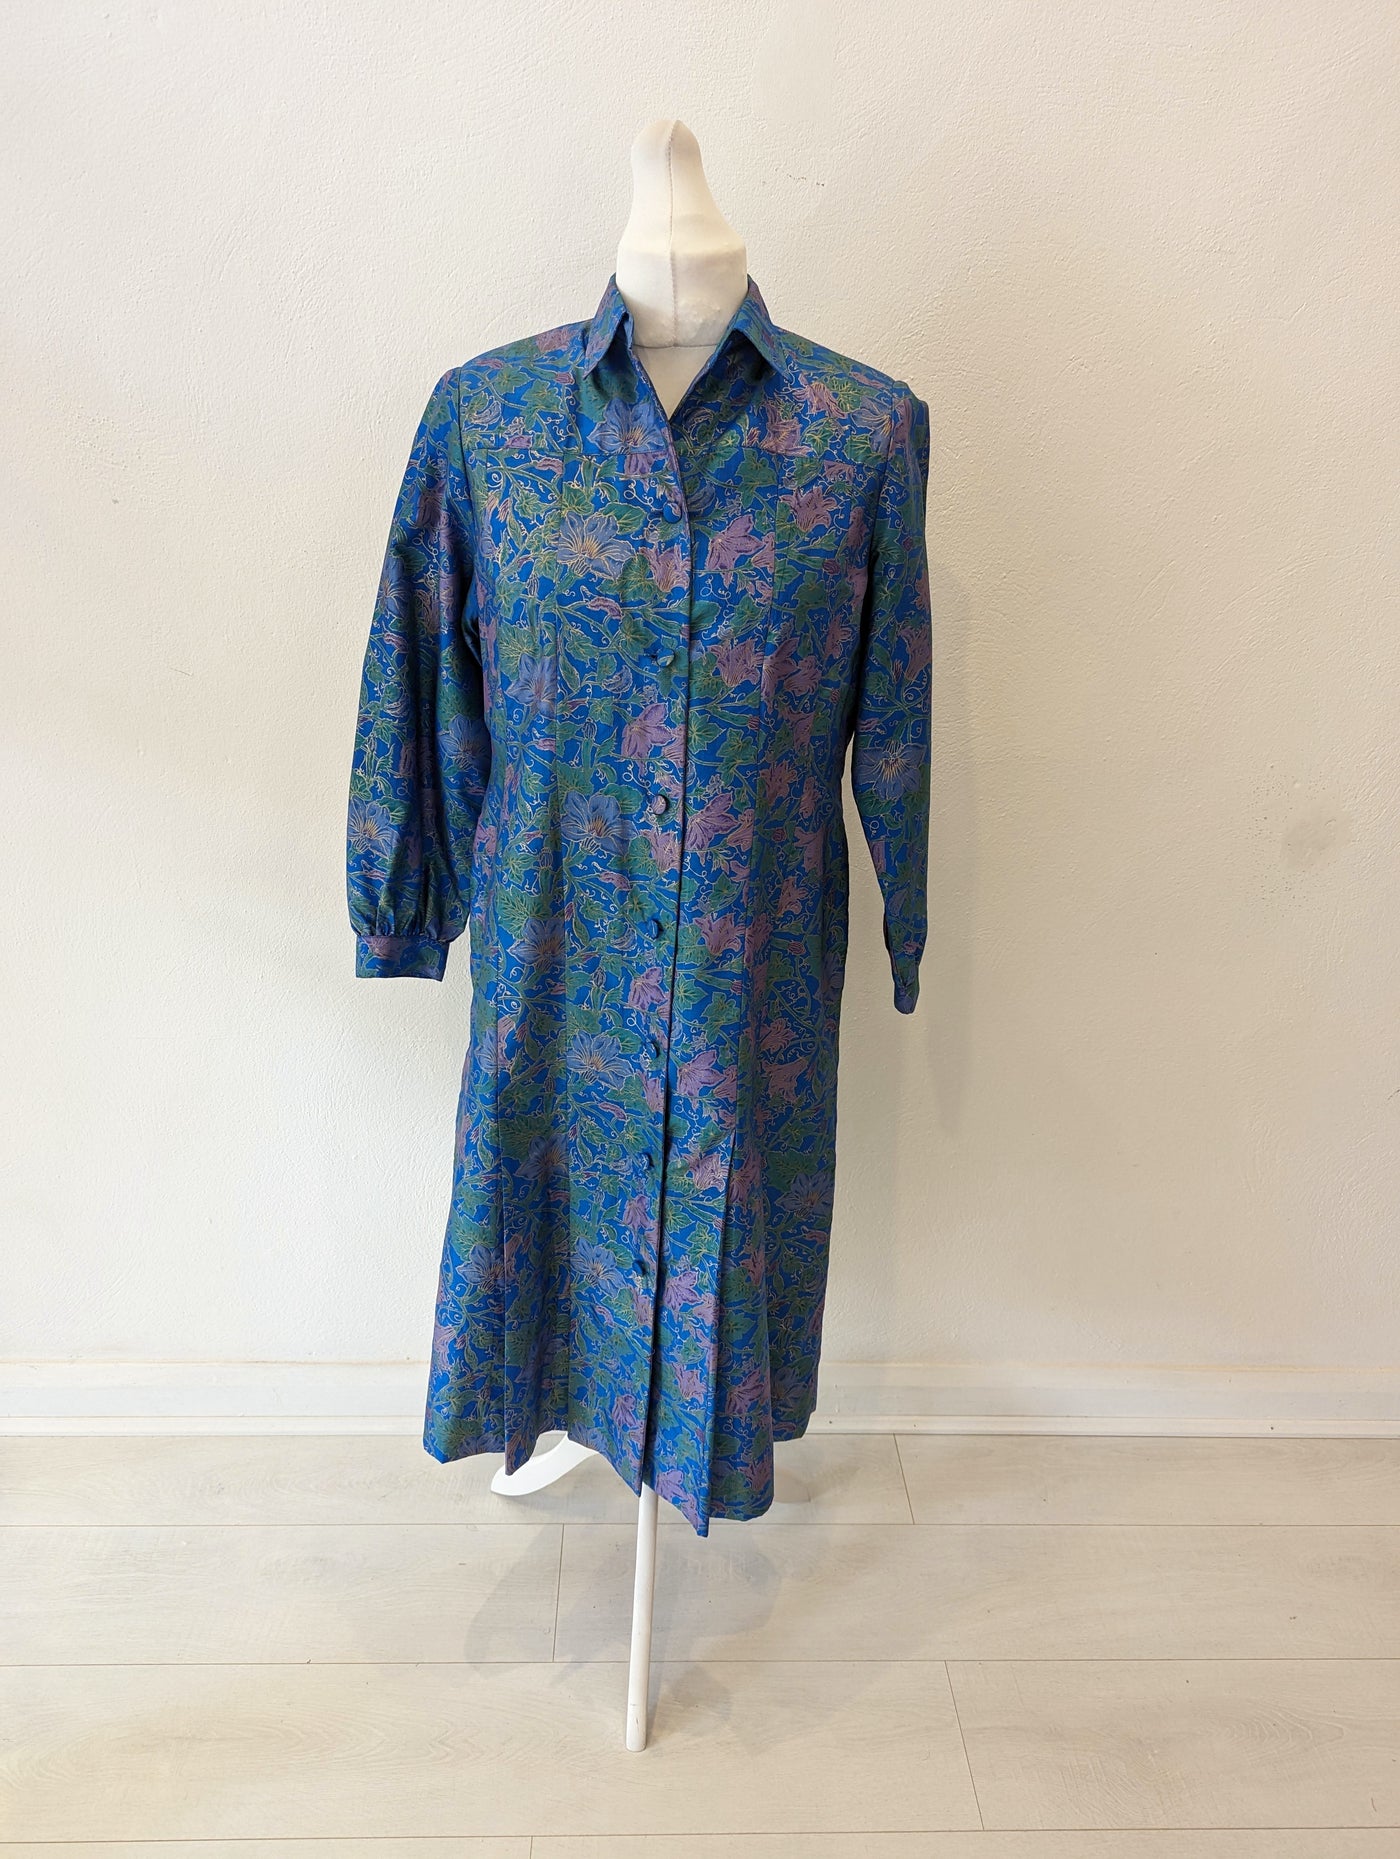 Handmade blue floral coat dress - up to a 14